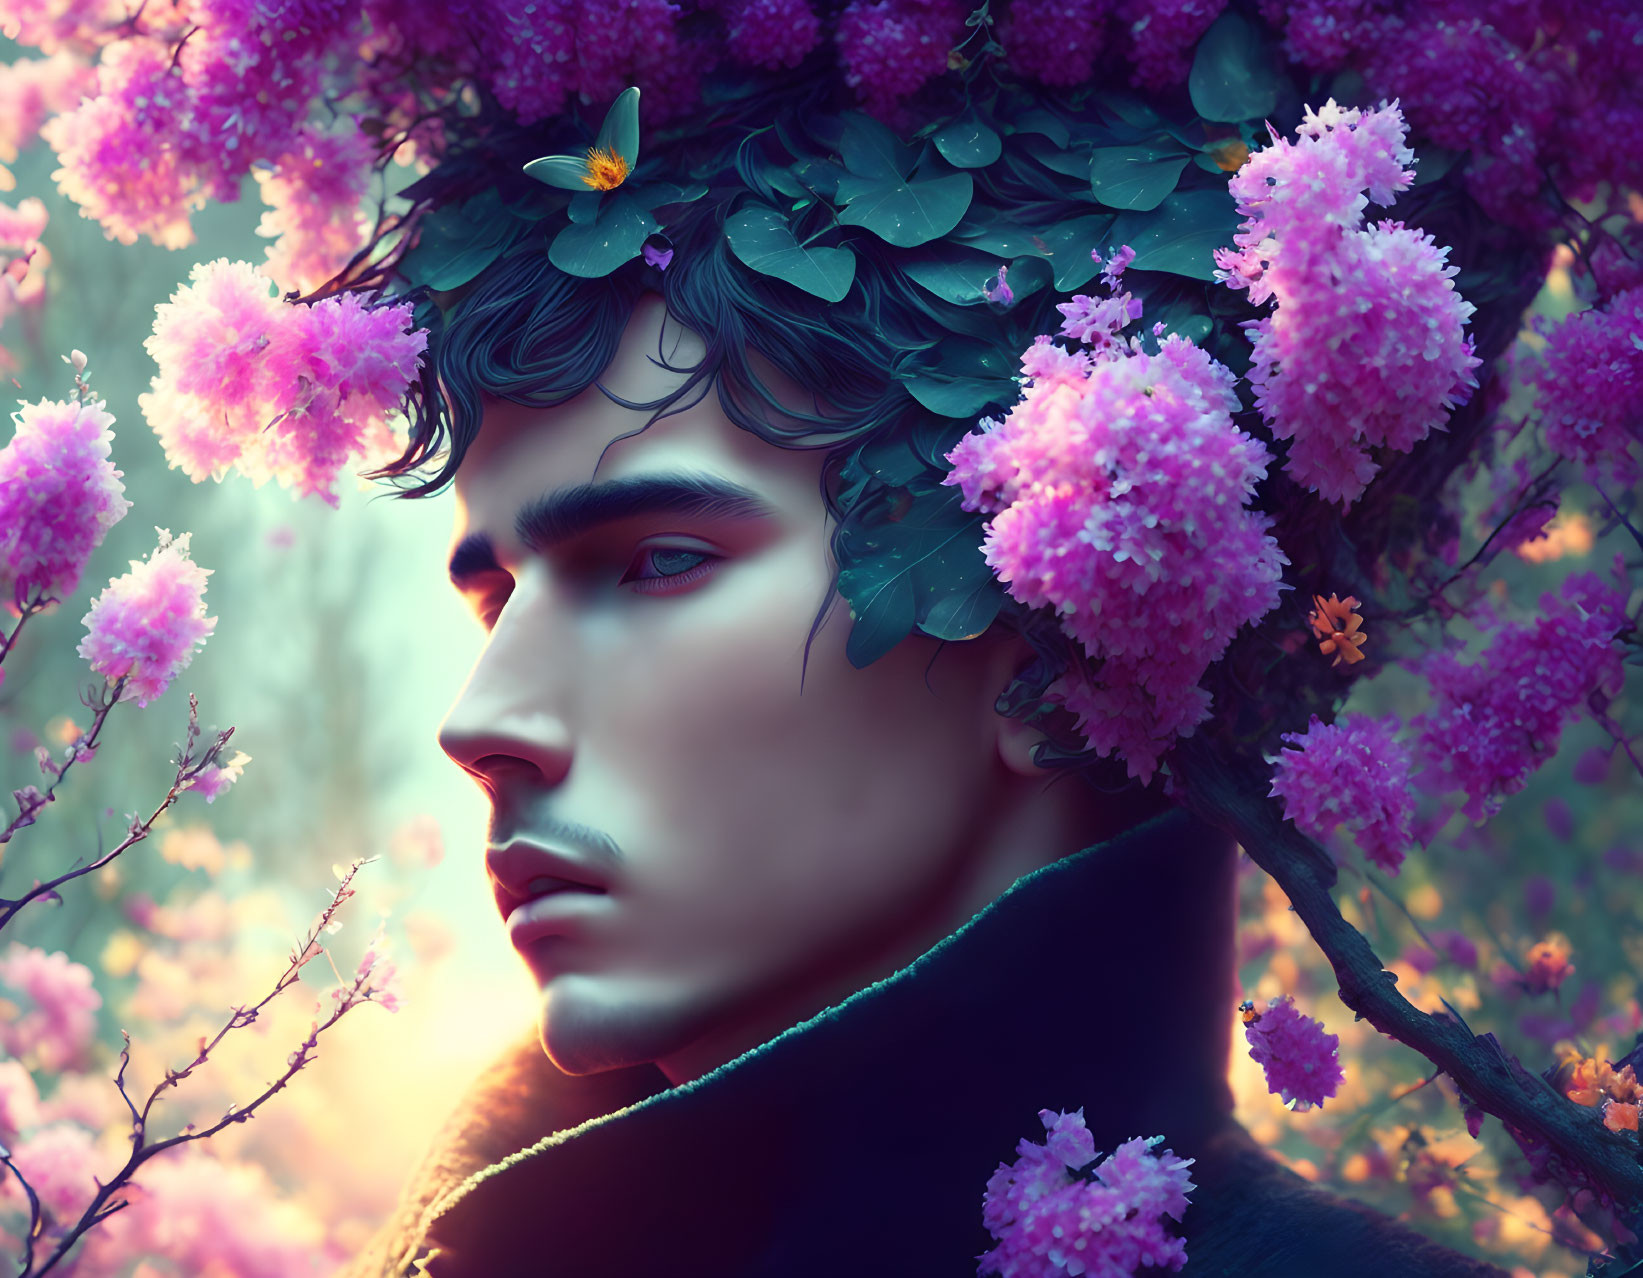 Man with dark hair wearing pink blossom wreath in purple forest